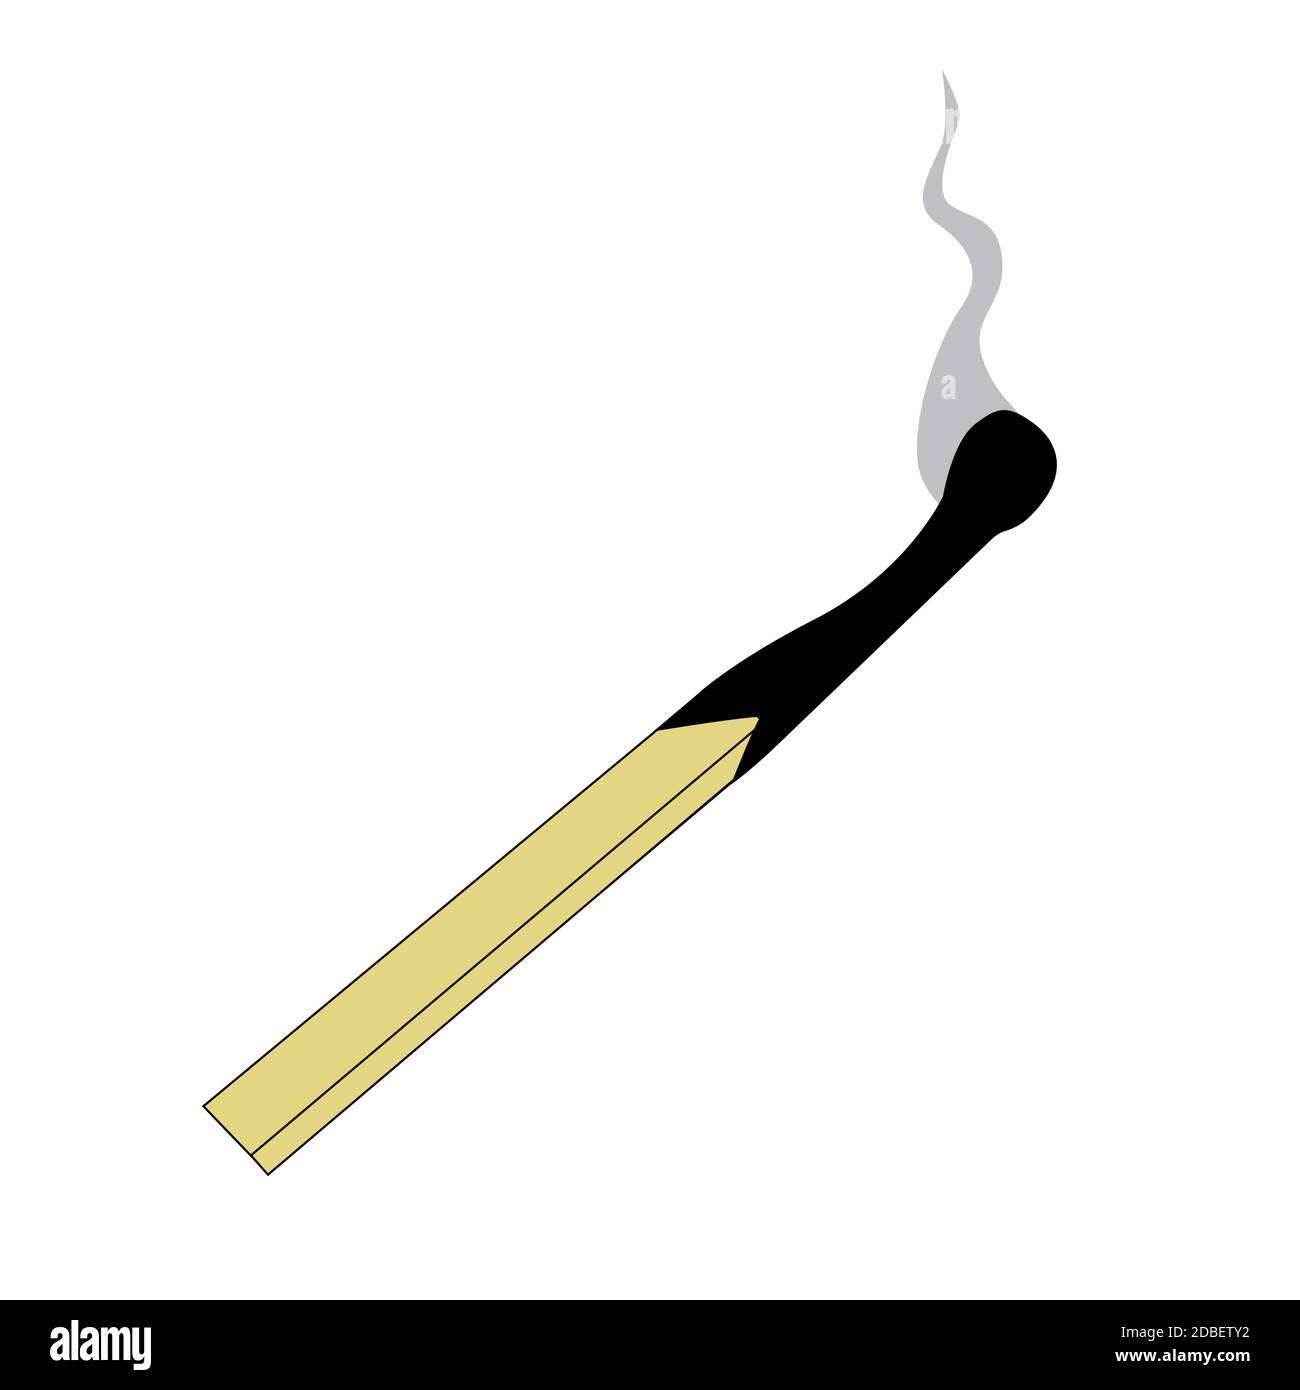 Burnt match - vector illustration isolated on white background. Stock Vector